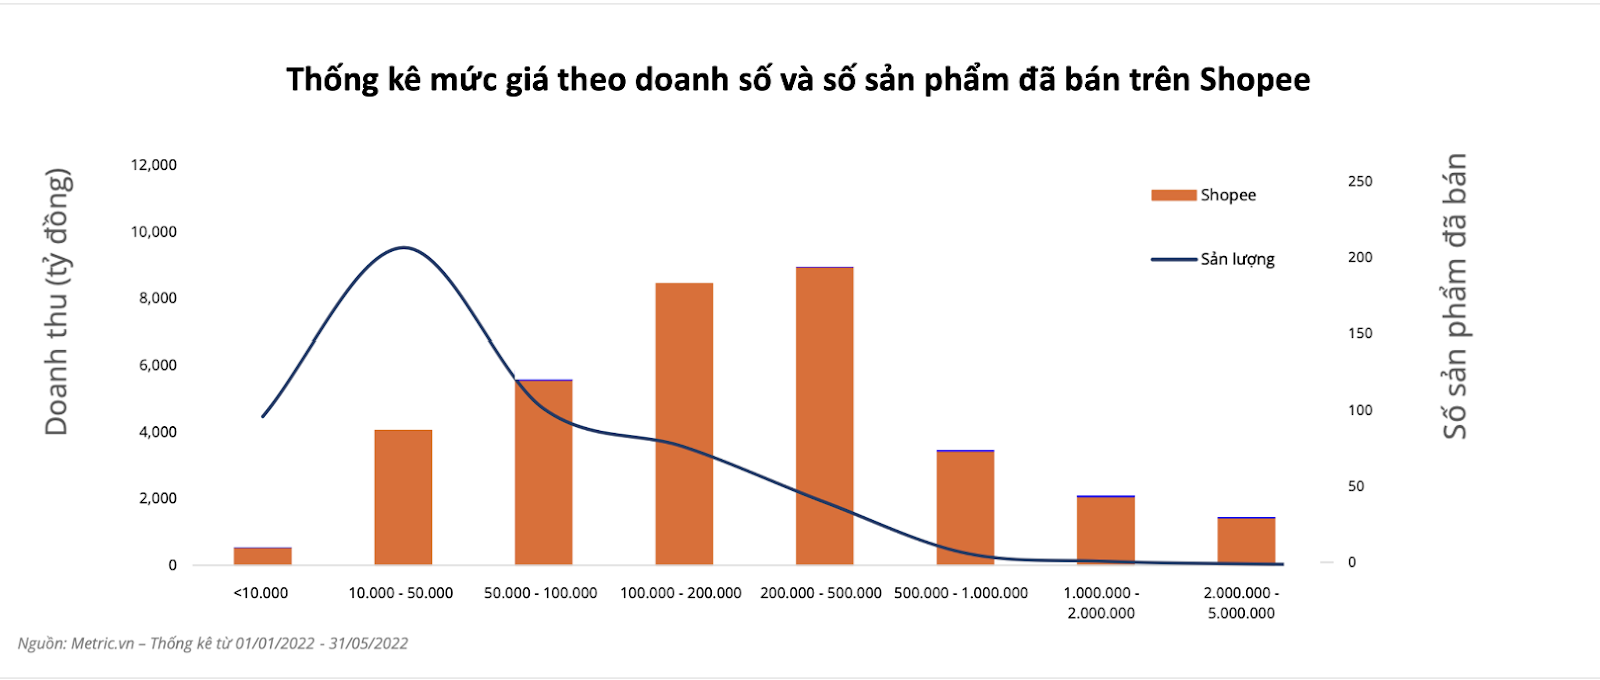 Source: Vietnam E-commerce Report 2022 (Price range in Shopee and items sold)